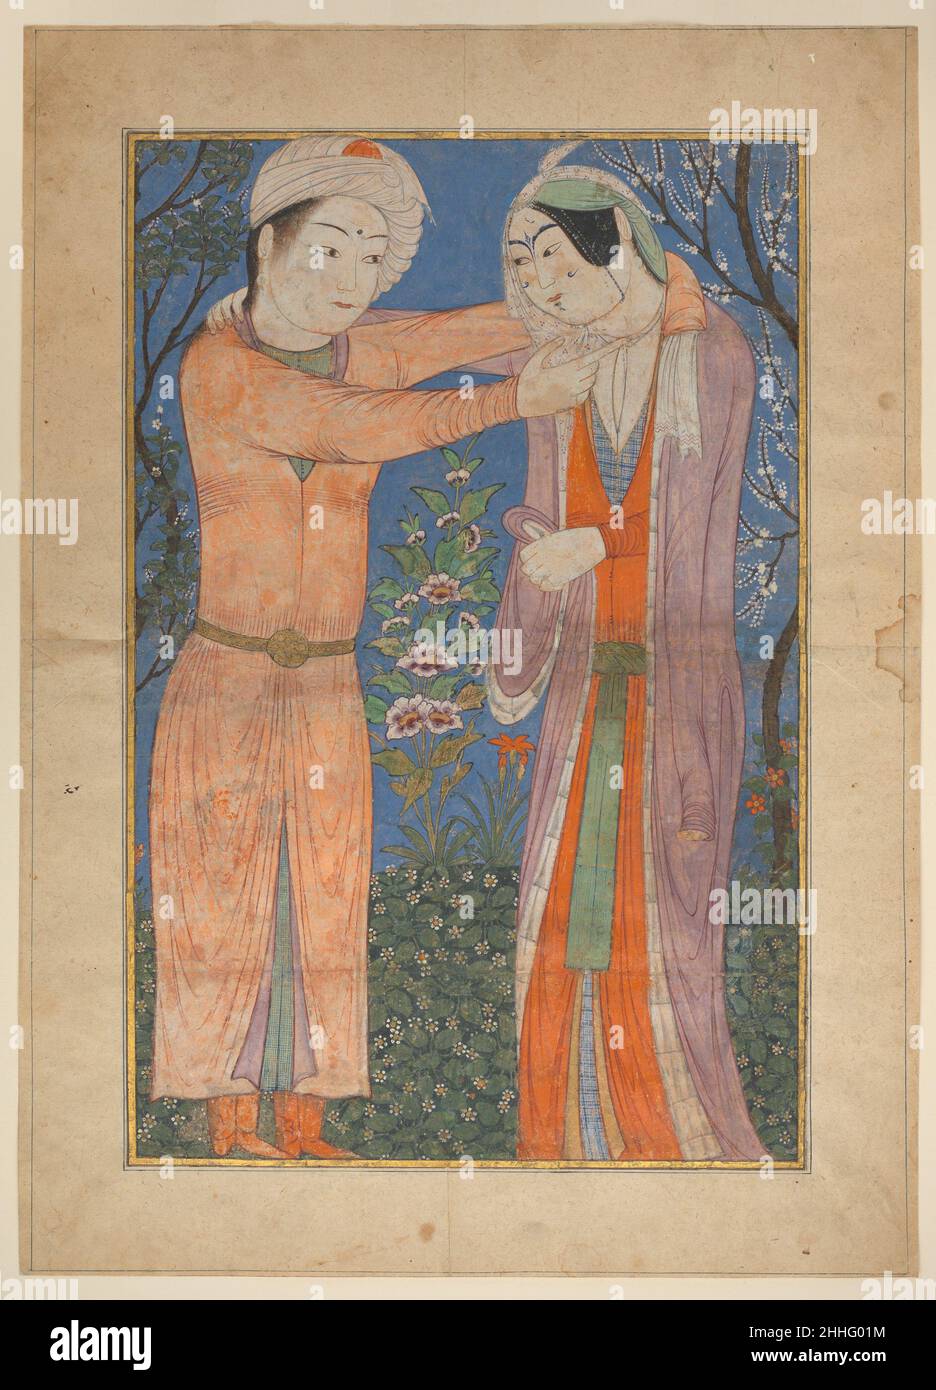 Princely Couple 1400–1405 Considering its unusually large scale, scholars have suggested that this painting of an embracing couple may have once served as a model for wall painting. No text is found on the painting to aid in the identification of the couple, but they have been compared to legendary lovers of Persian literature, including the characters of Khusrau and Shirin, known from the poet Nizami’s Khamsa (Quintet).. Princely Couple  451399 Stock Photo